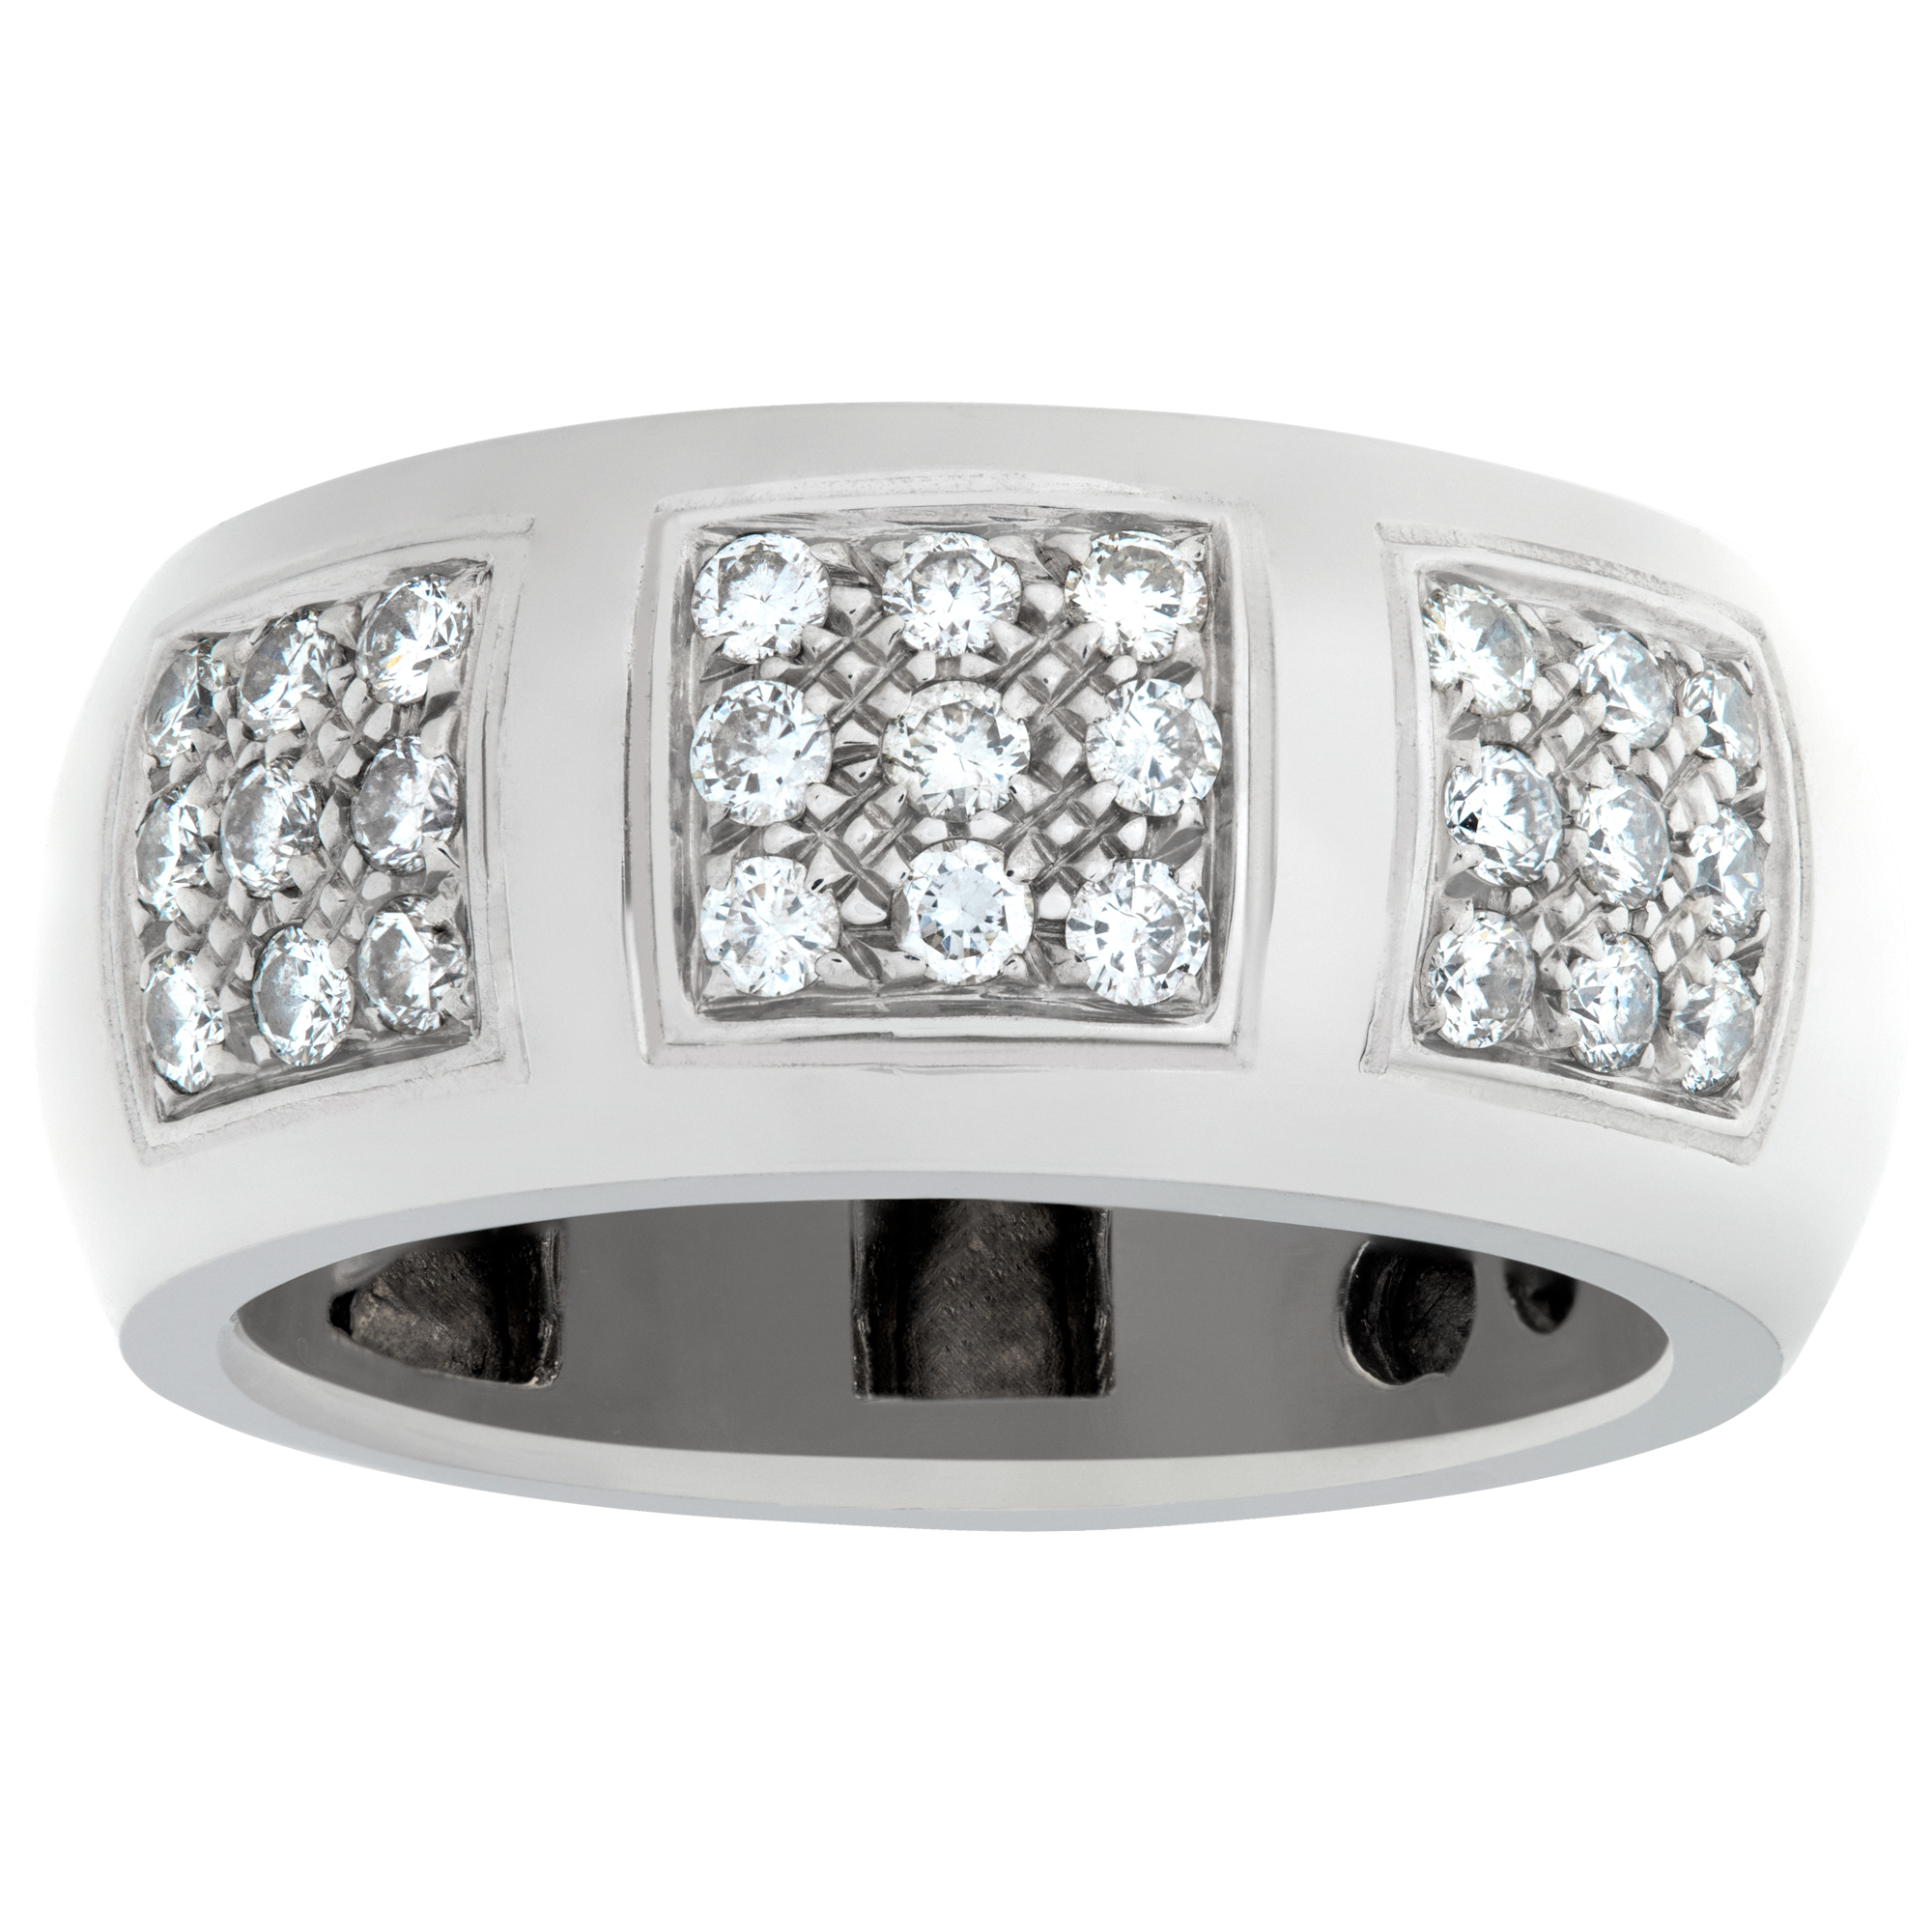 Wide diamonds band set in 18k white gold. Round  brilliant cut  diamonds total approx. weight: 1.50 carat